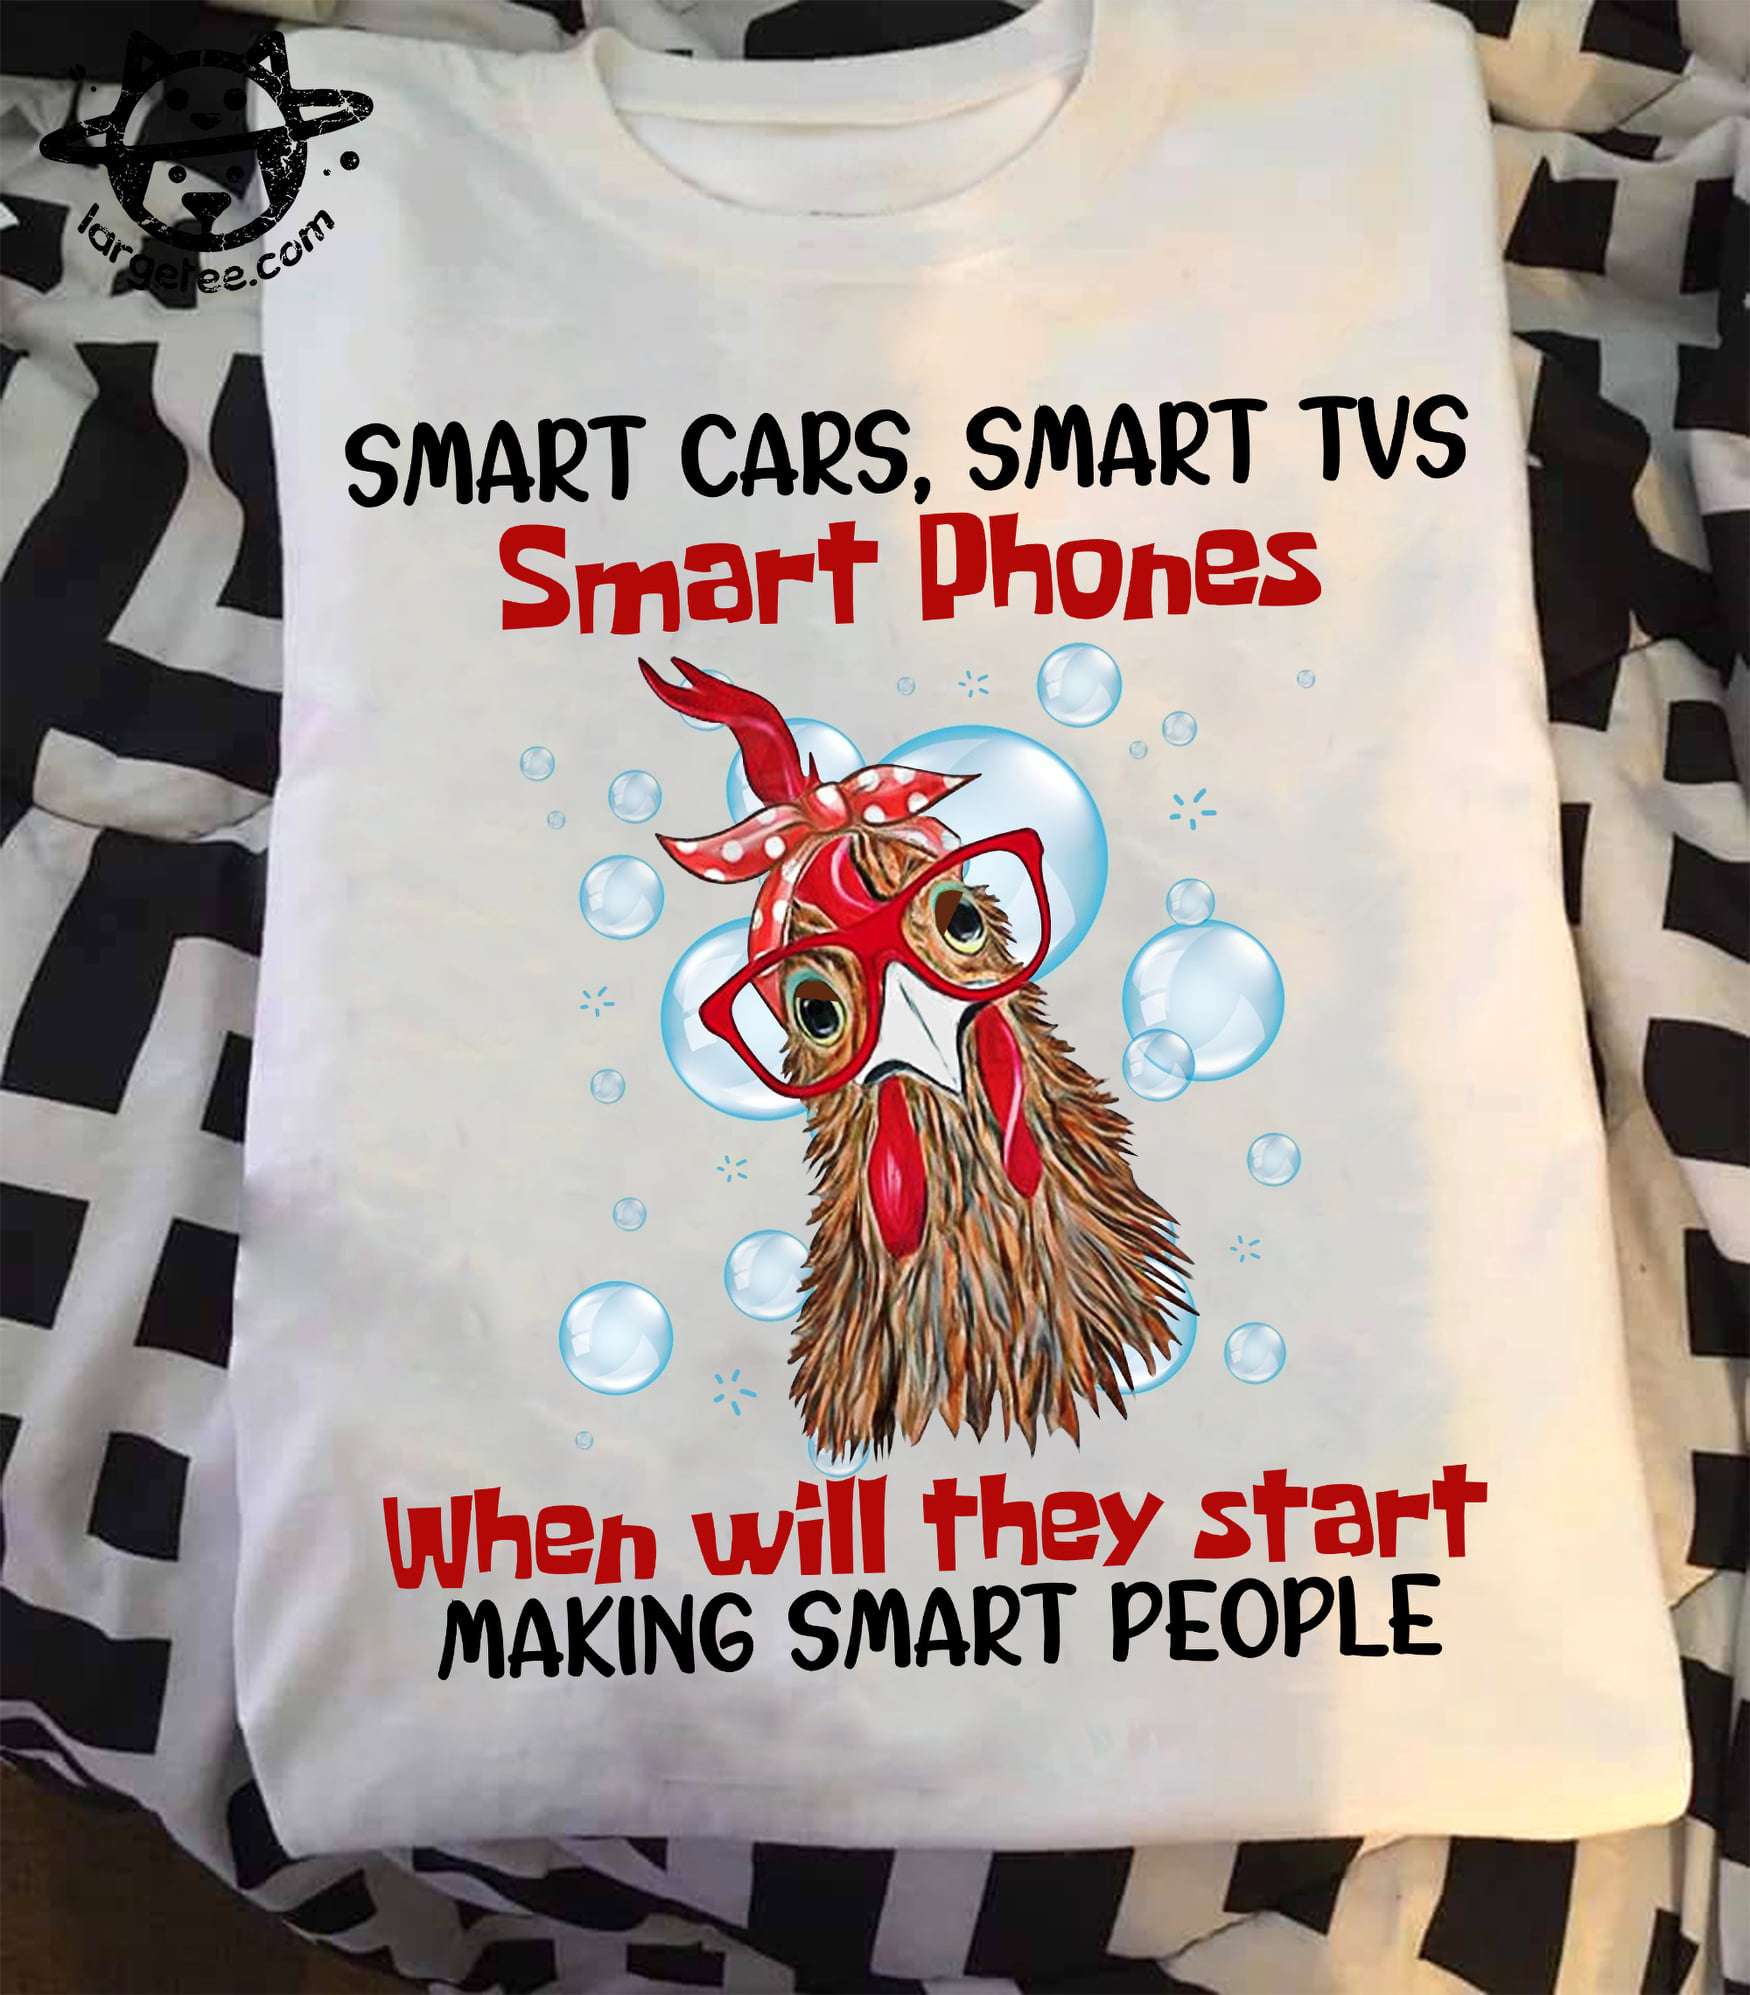 Smart cars, smart tvs, smart phones when will they start making smart people - Stupid people, chicken with glasses